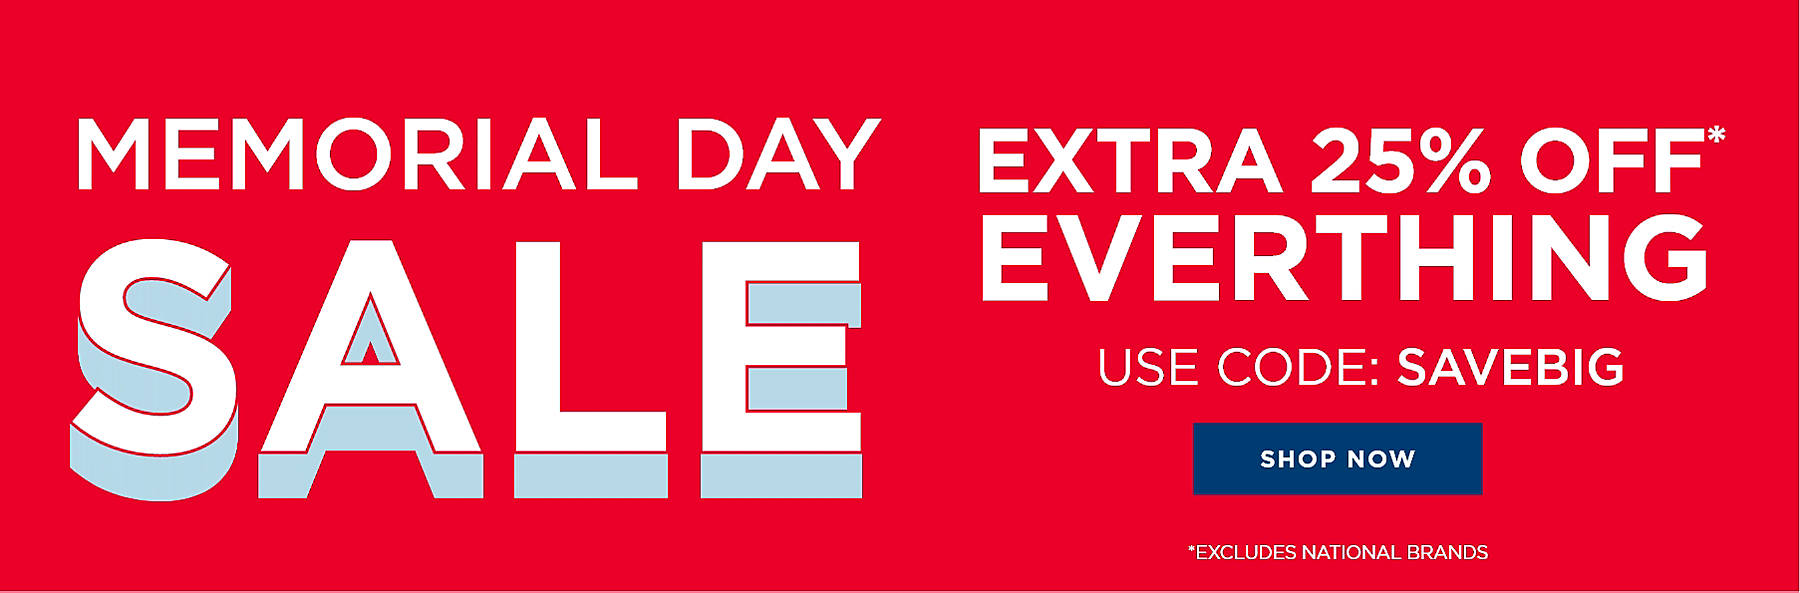 Memorial Day Sale Extra 25% off* everything Use code: SAVEBIG Shop Now *Excludes National Brands